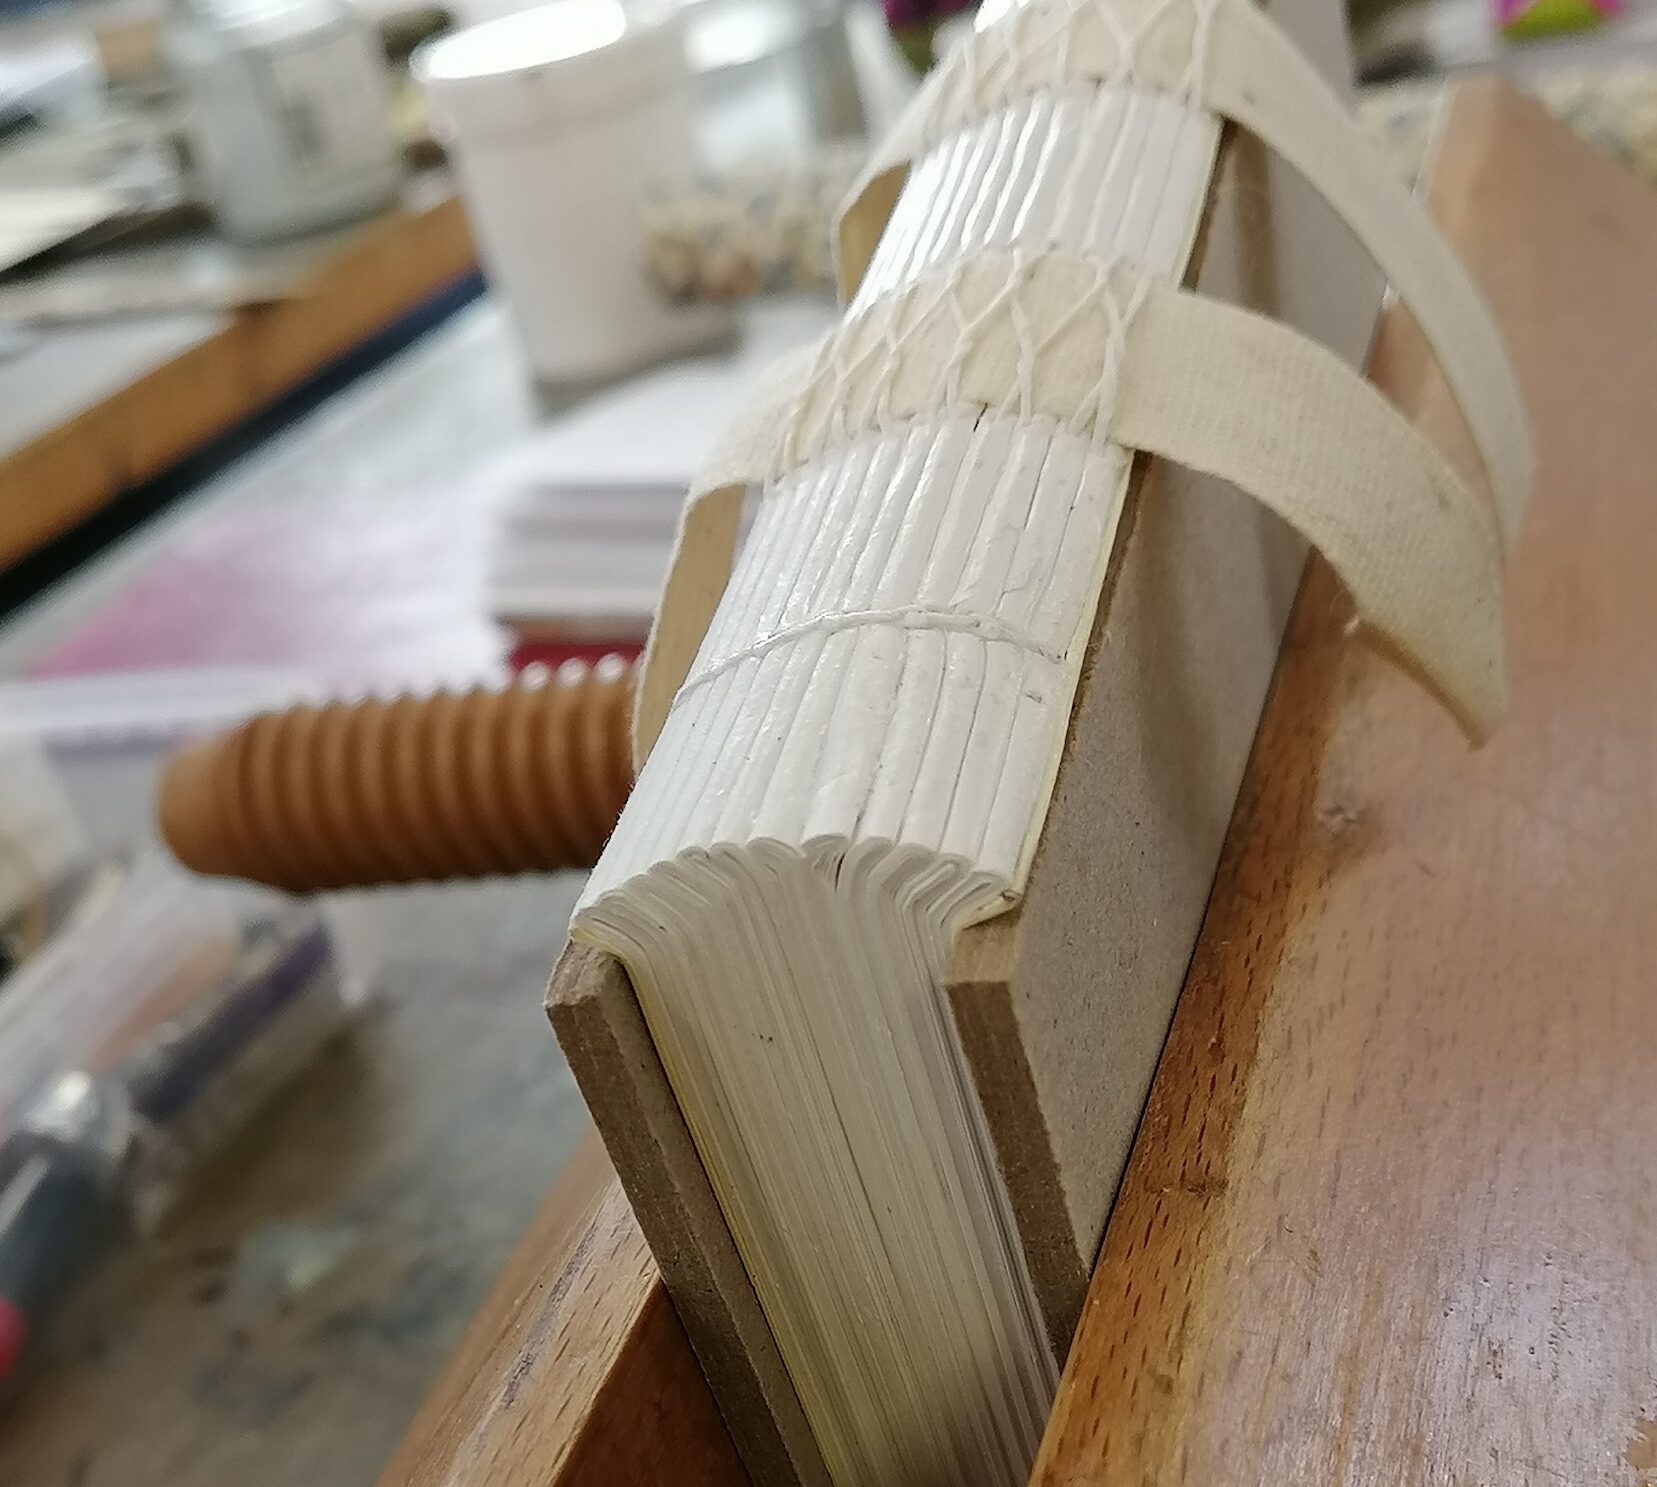 spine of book